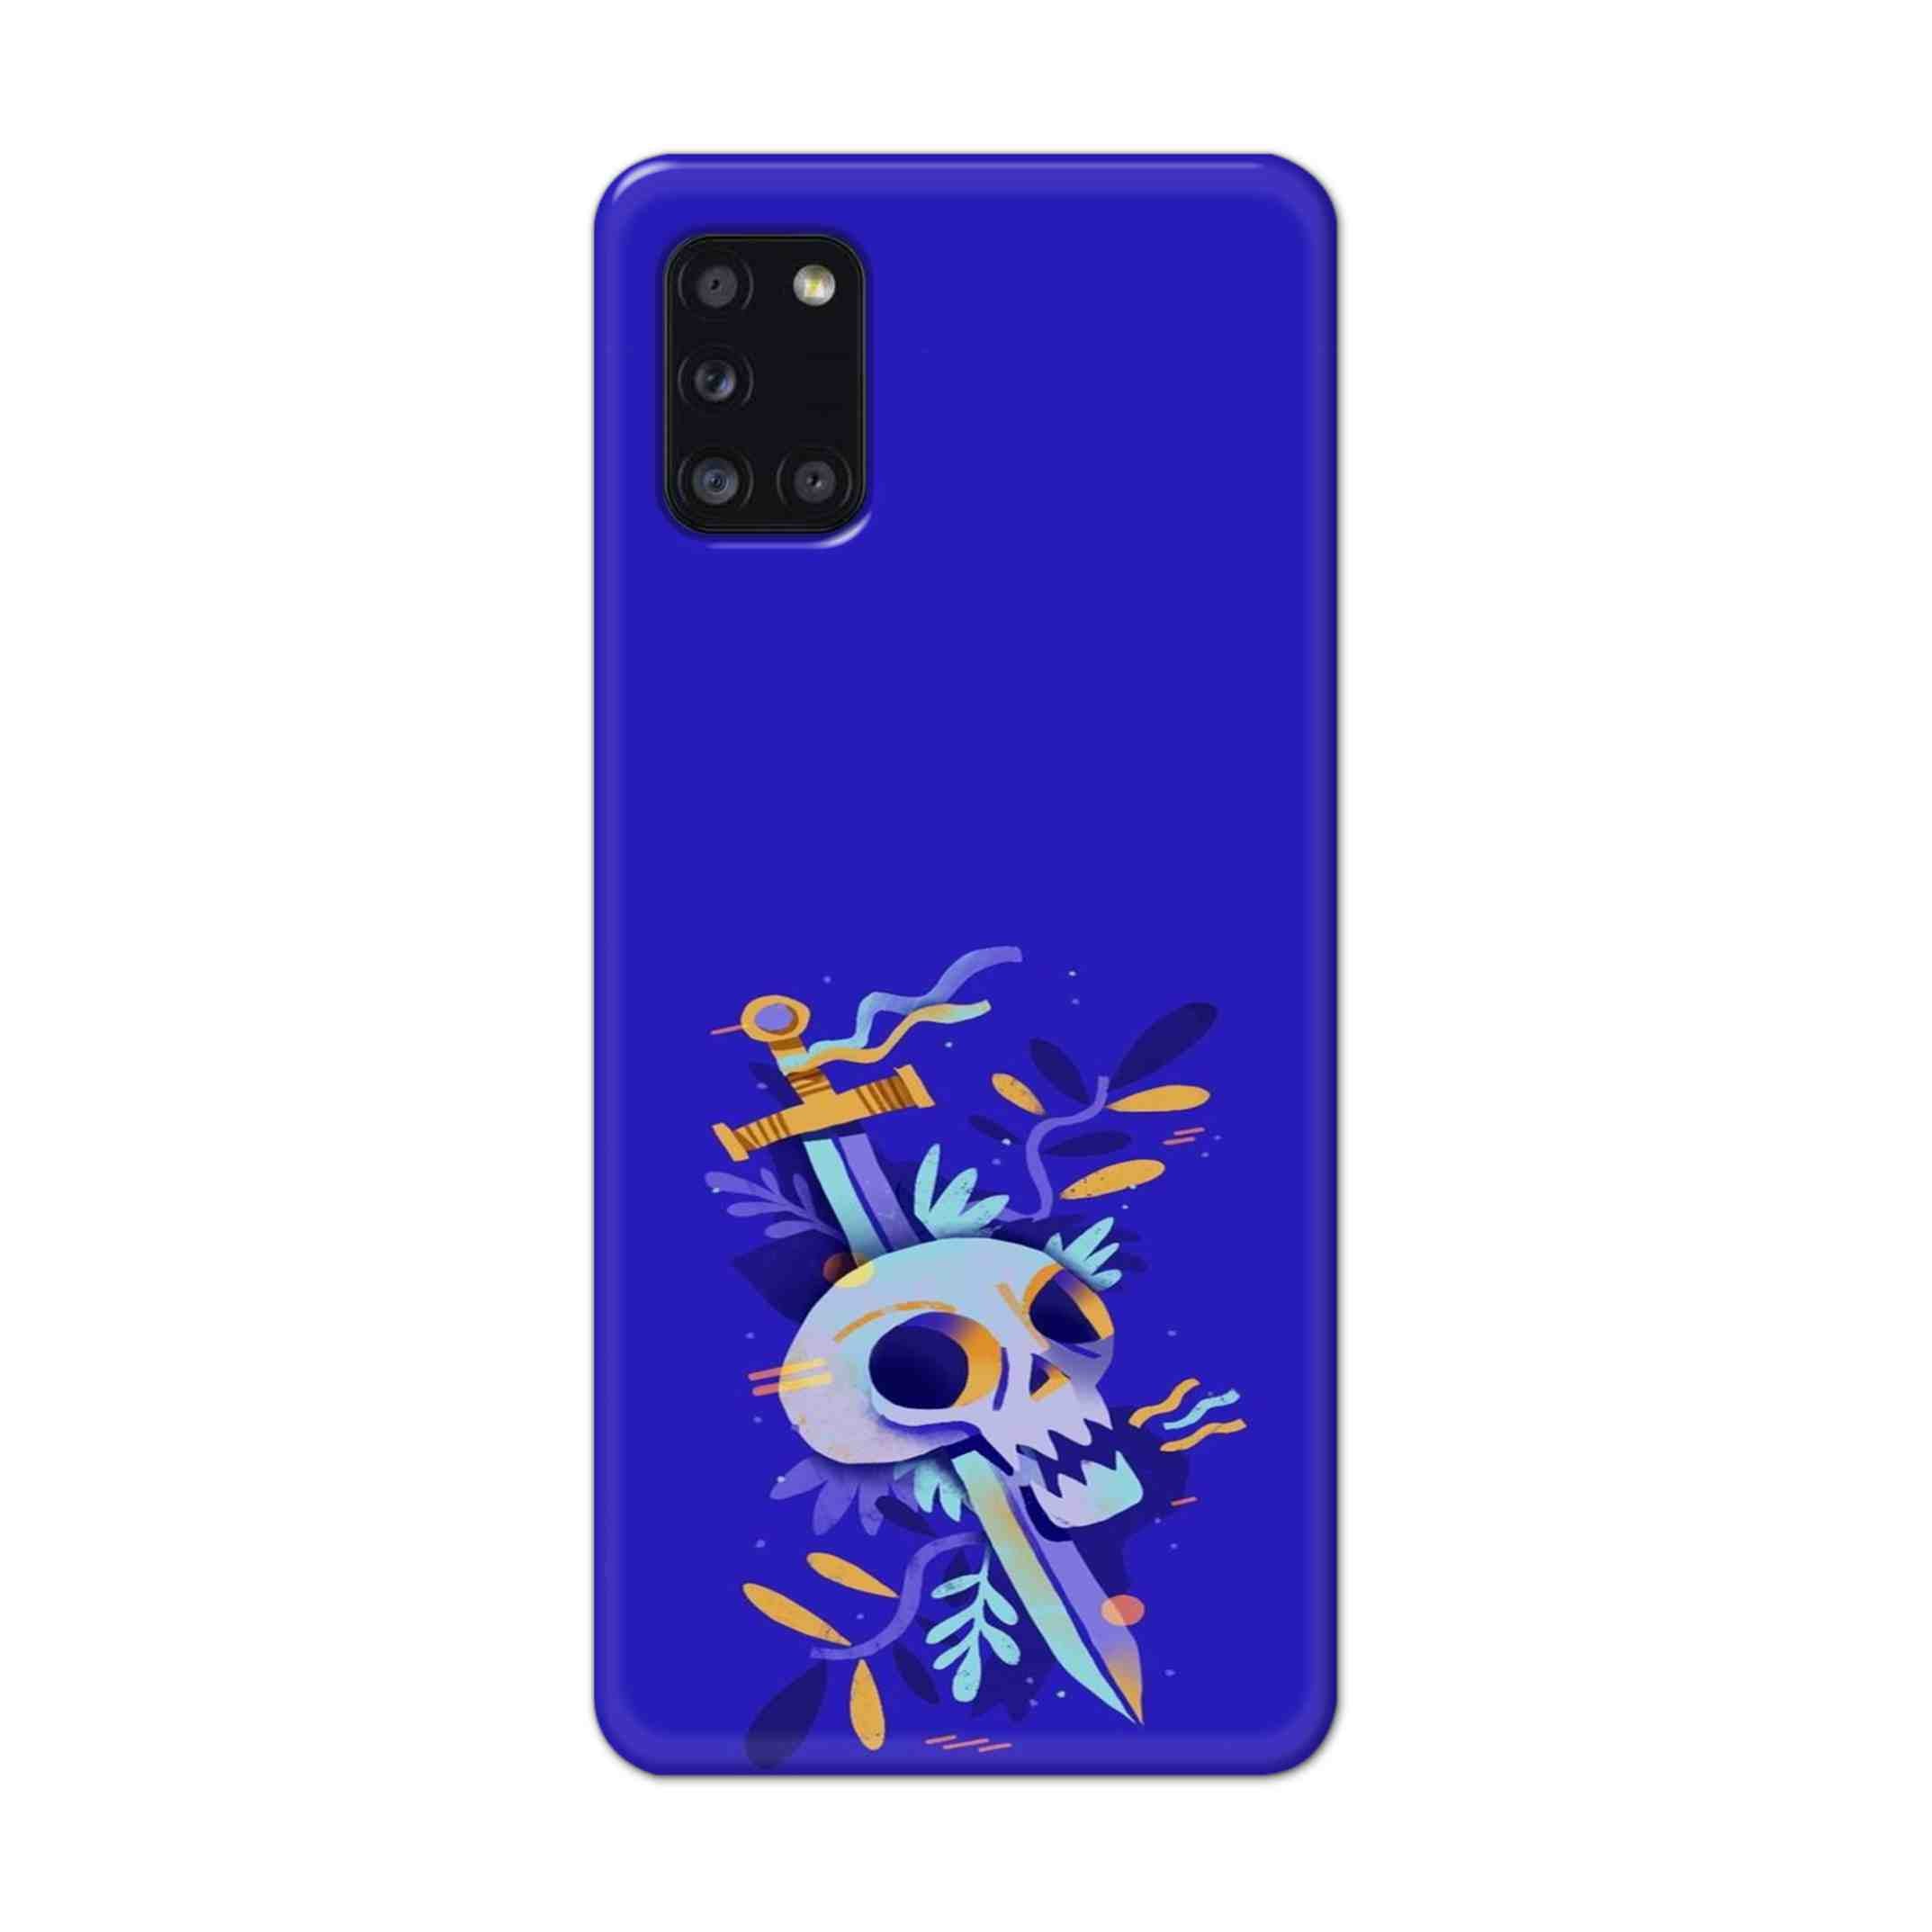 Buy Blue Skull Hard Back Mobile Phone Case Cover For Samsung Galaxy A31 Online